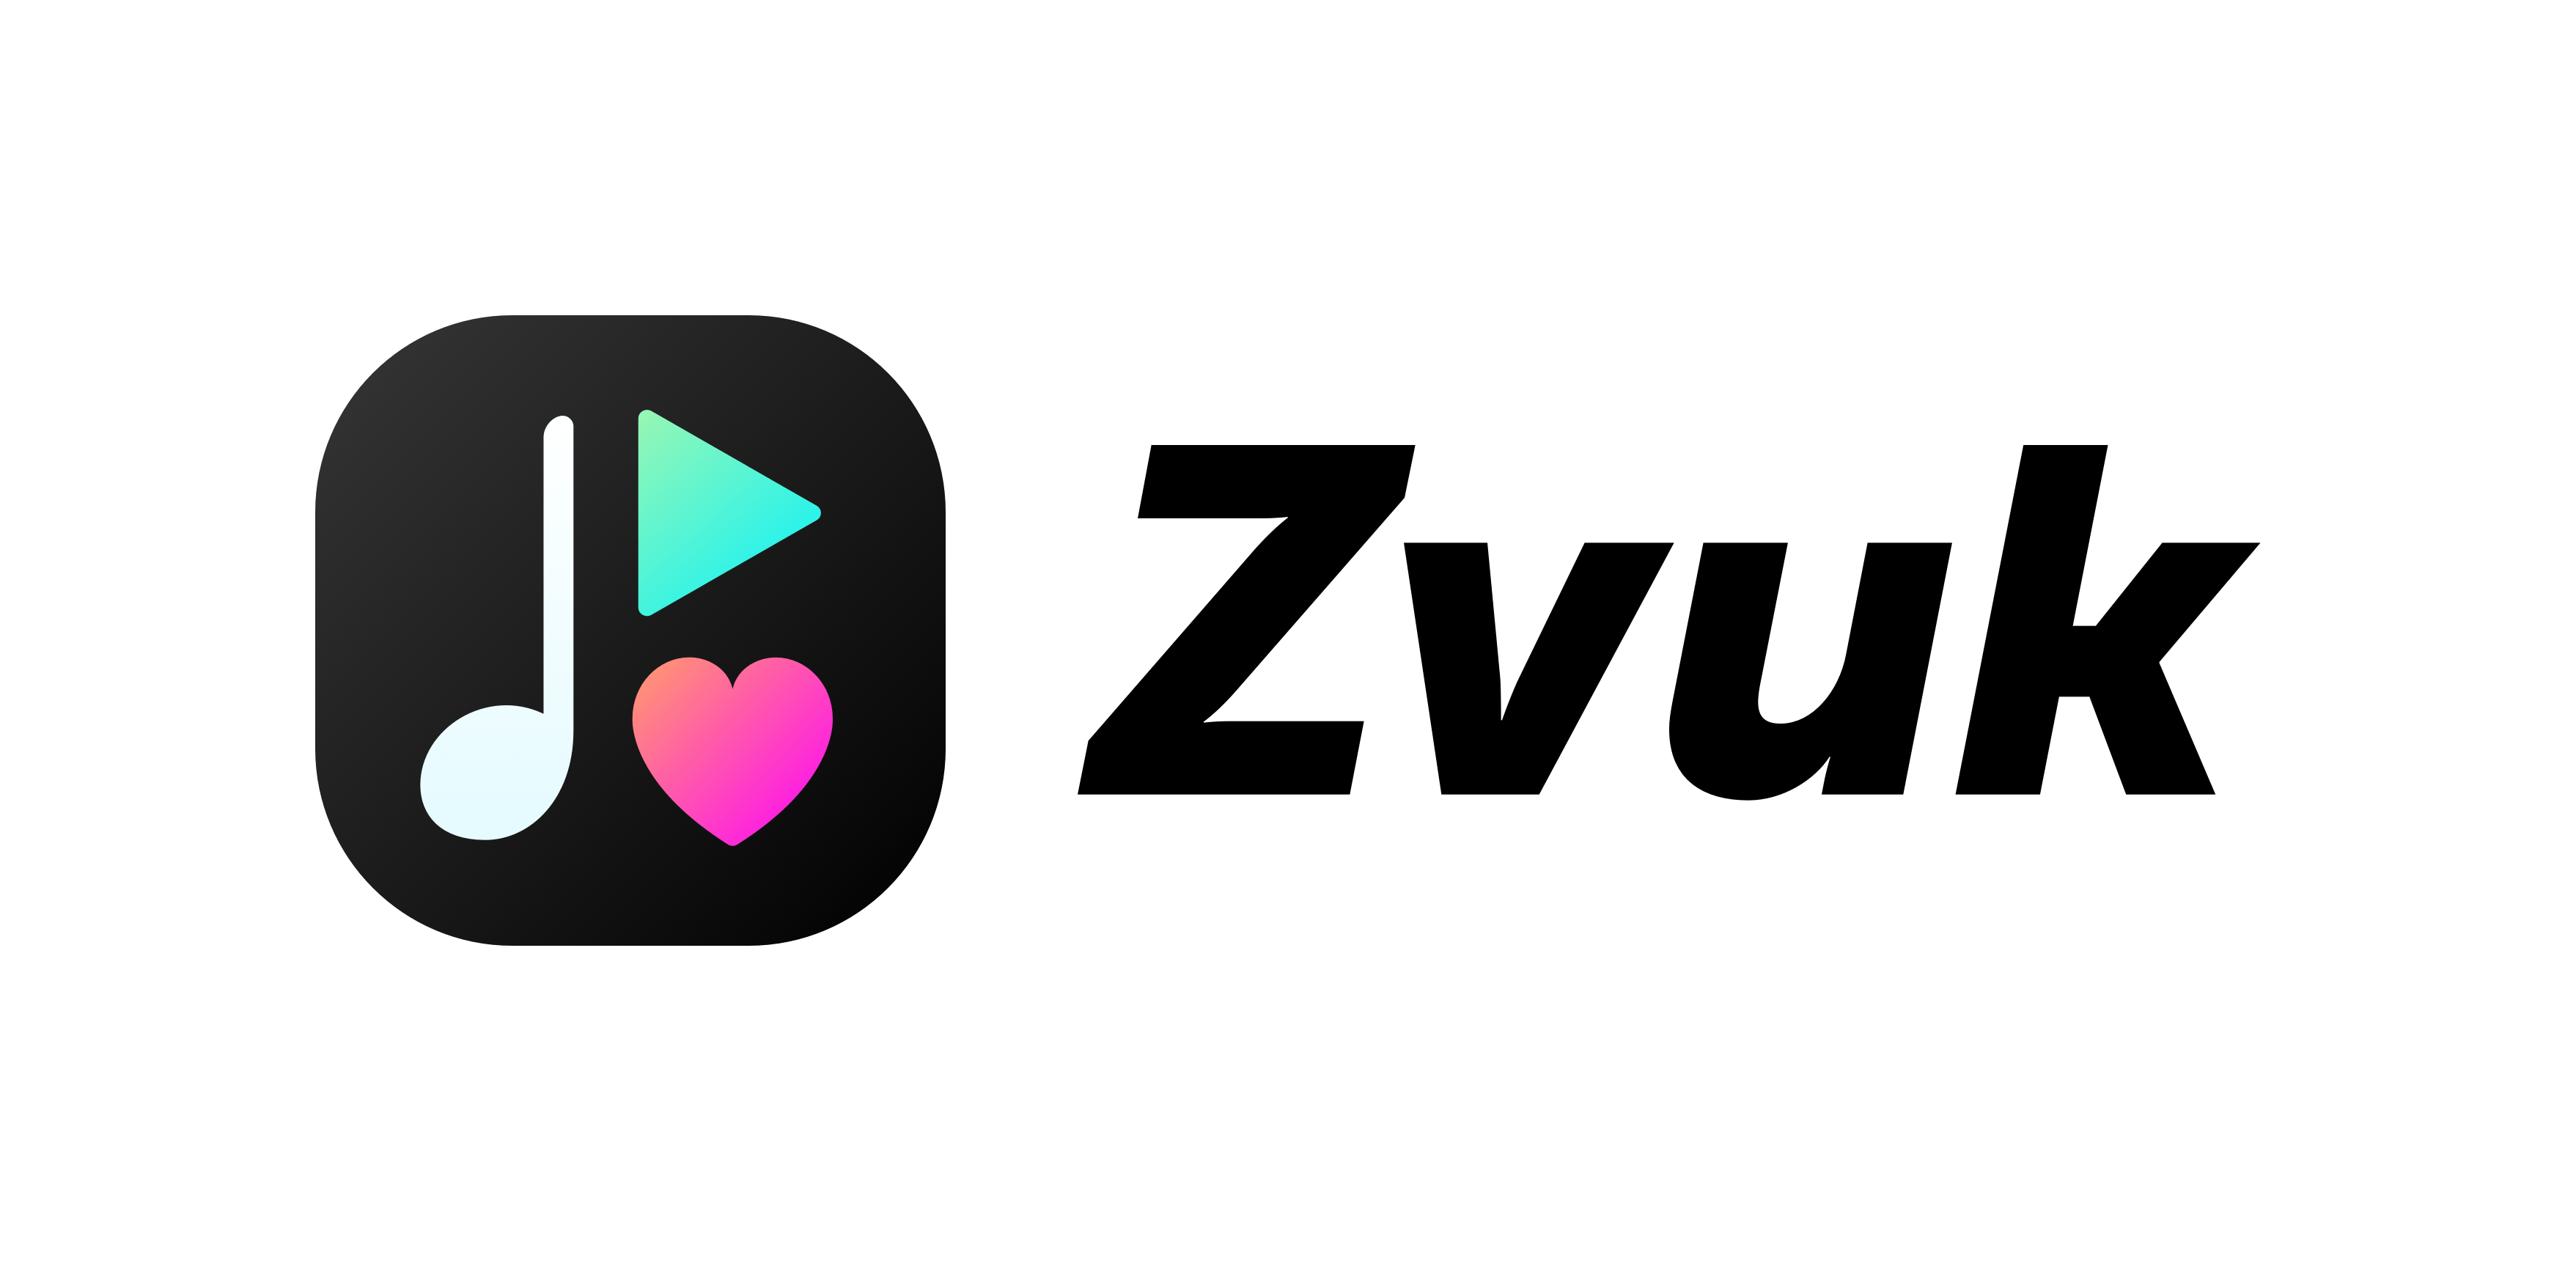 TuneCore Logo - Zvuk: Description, Go Live Time, Territories, How They Sell Your